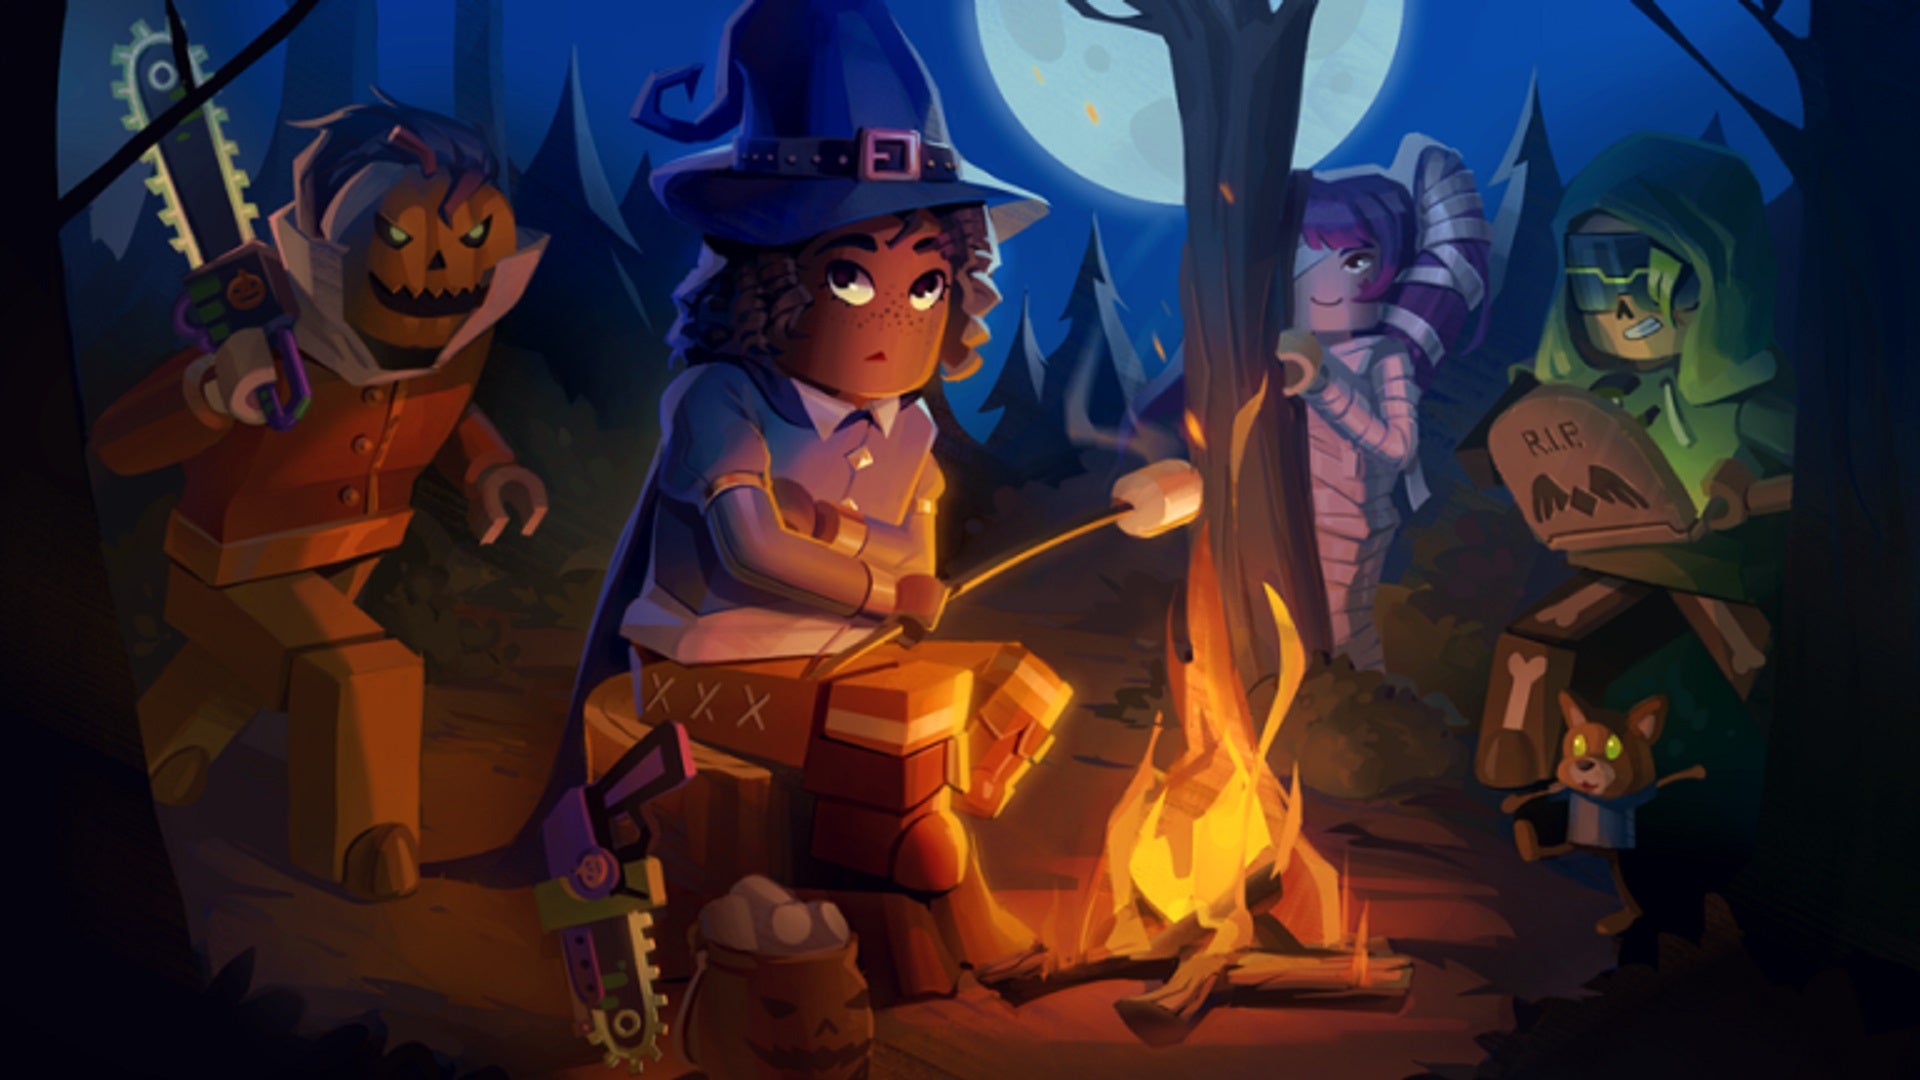 A stylised cartoon of a Roblox character dressed as a witch, roasting a marshmallow over a campfire in the woods, being menaced by a mummy, a hooded figure, and a chainsaw-wielding scarecrow.